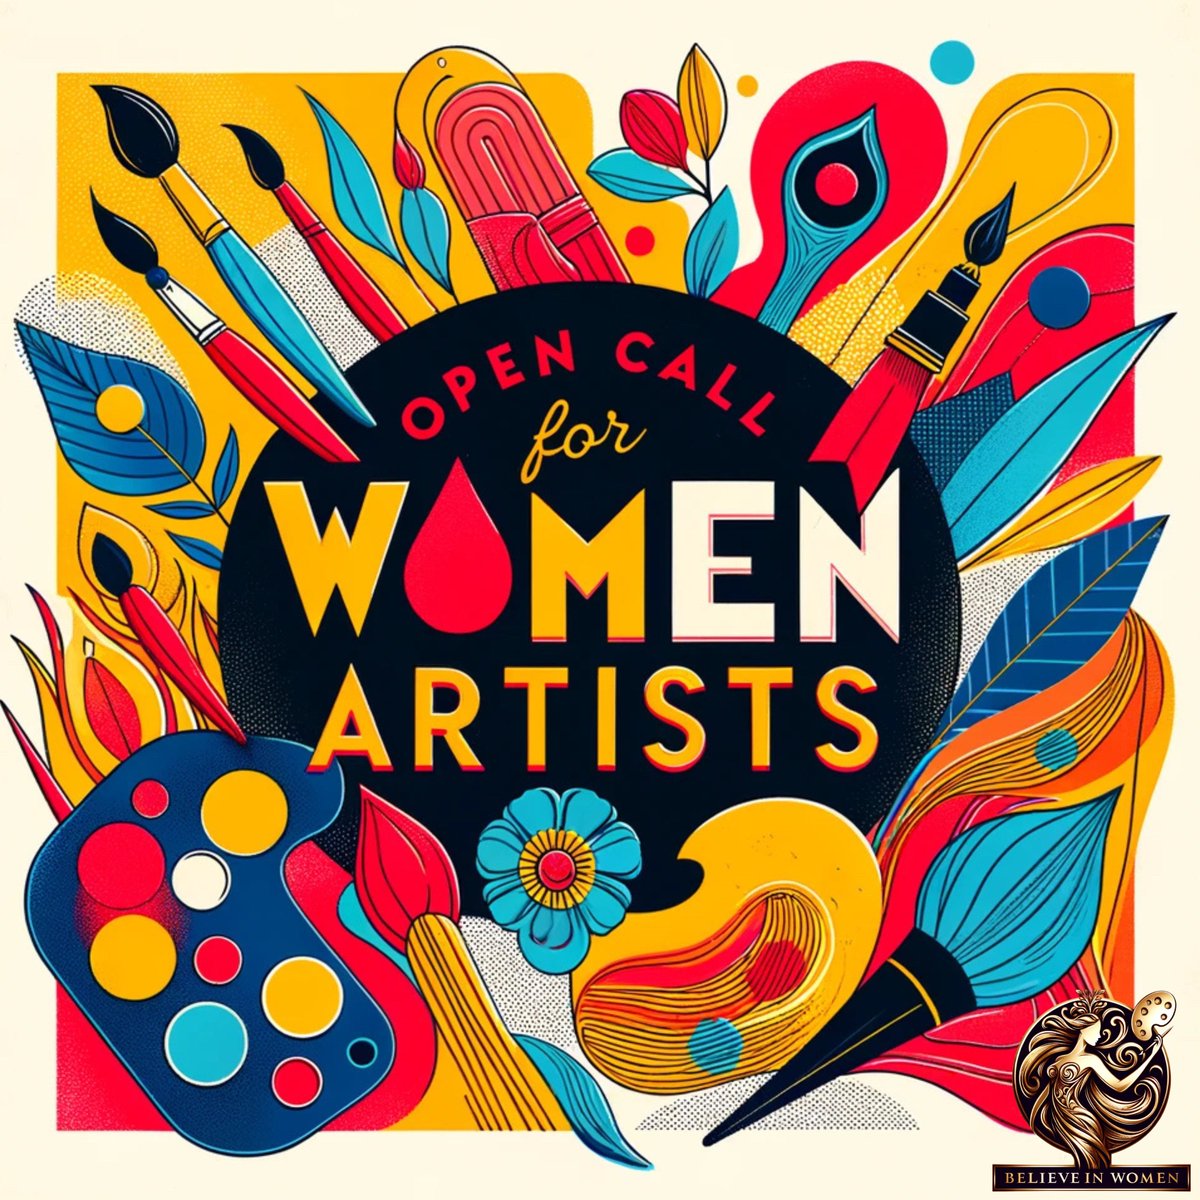 Are you a woman artist? 🎨 💫Share your masterpieces in comments 💫Follow @beinwomen 💫 Tag your favorite female artists